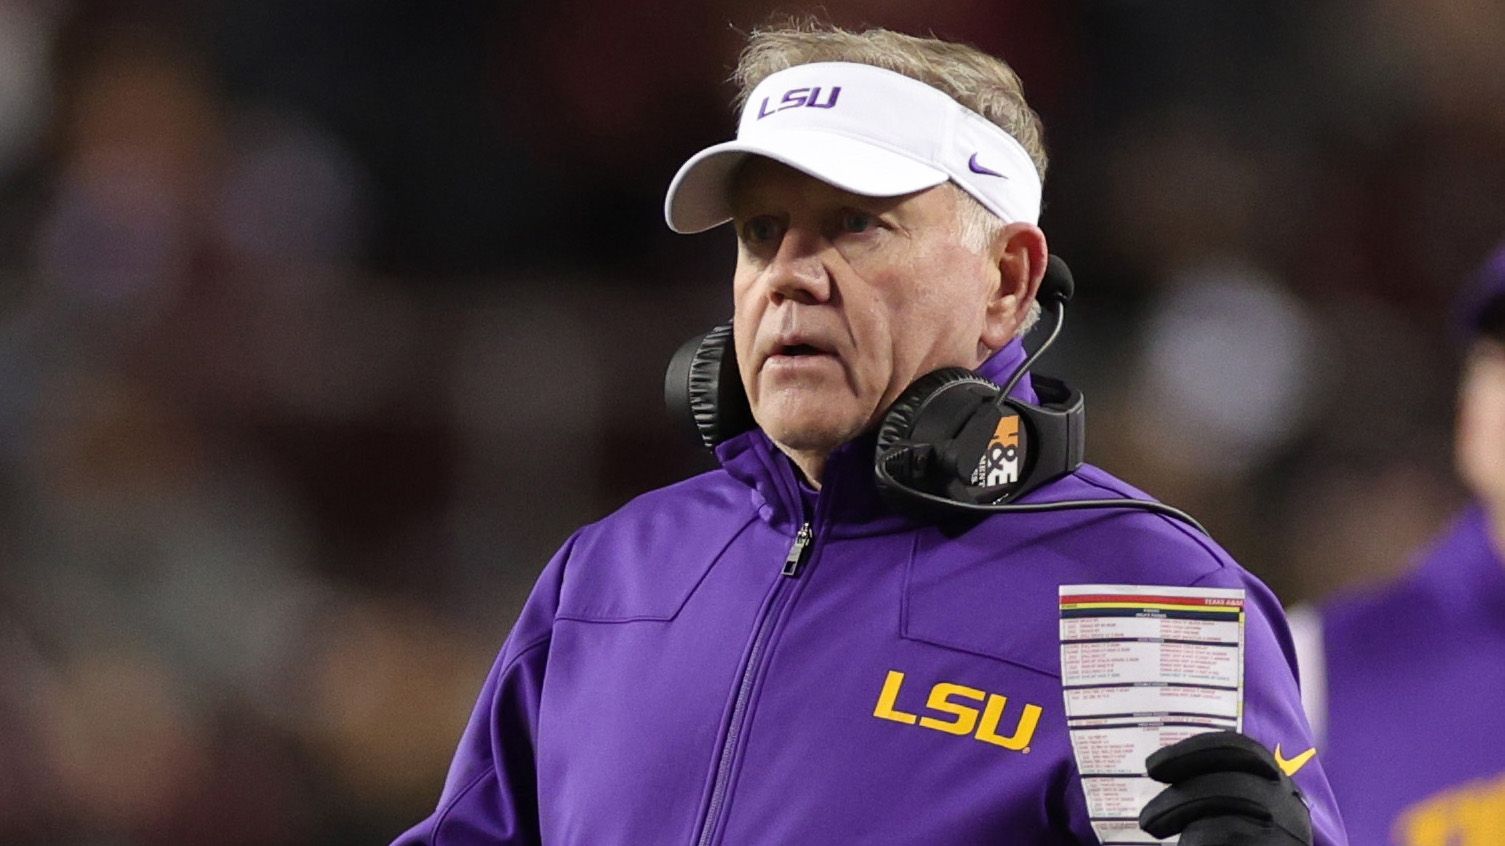 Kelly says LSU has played its best when it's needed